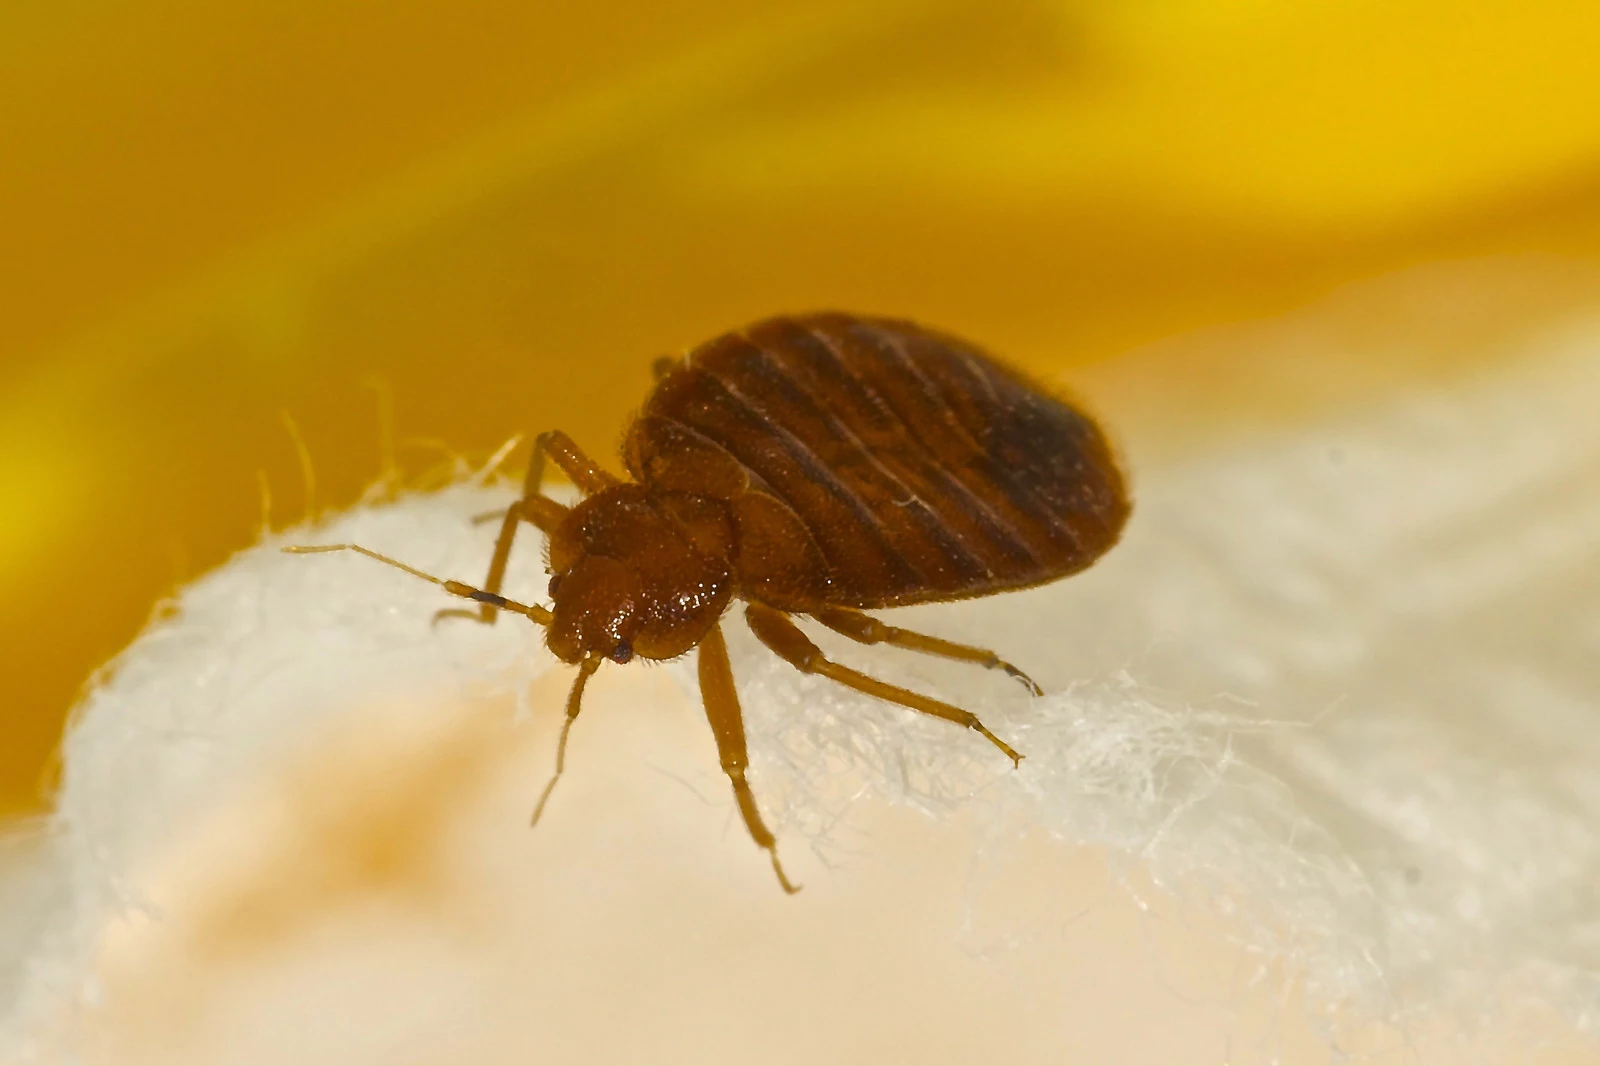 Report says Bed Bug infestations are on the rise in NJ